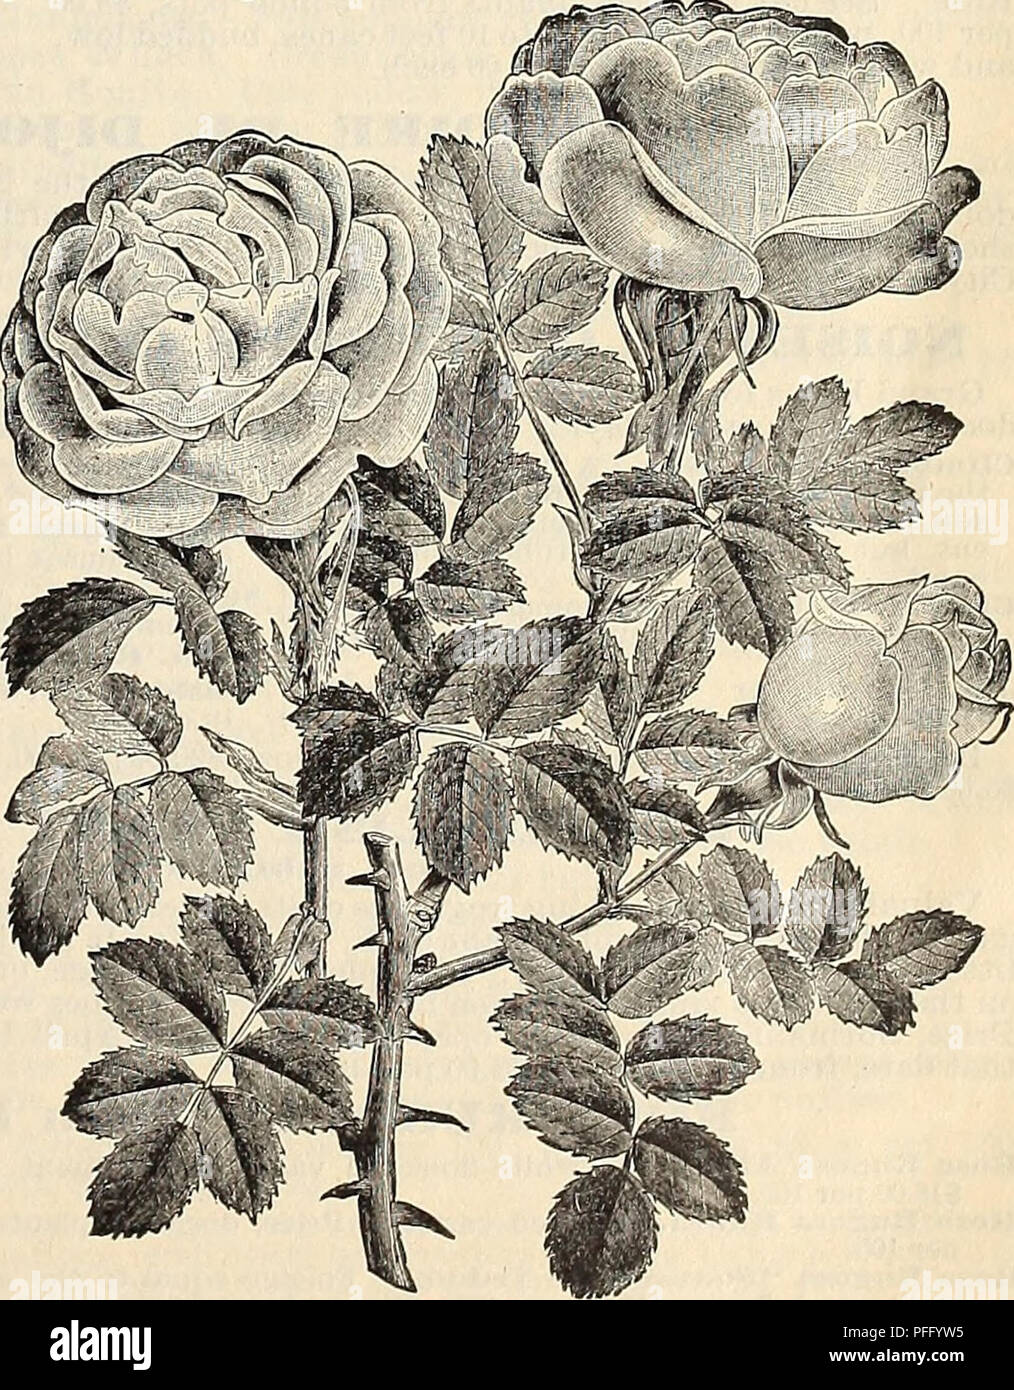 . Dealers and florists wholesale list of plants. Seed industry and trade Catalogs; Seeds Catalogs; Flowers Seeds Catalogs; Plants, Ornamental Catalogs. HARDY DORMANT ROSES.—Continued. DORMANT ROSE, SHOWING HOW PLANTING AND PRUNING ARE DONE Prune when planted and as shown on dotted lines. Eugene Furst. Velvety crimson, very large flower, with broad massive petals quite double; a distinct and valuable Rose. First among crimsons. Fisher Holmes. Finely shaped flowers and buds, intense, dark &quot;velvety crim- son ; considered by connoisseurs to be an improvement on Gen. Jacqueminot. Francois Leve Stock Photo